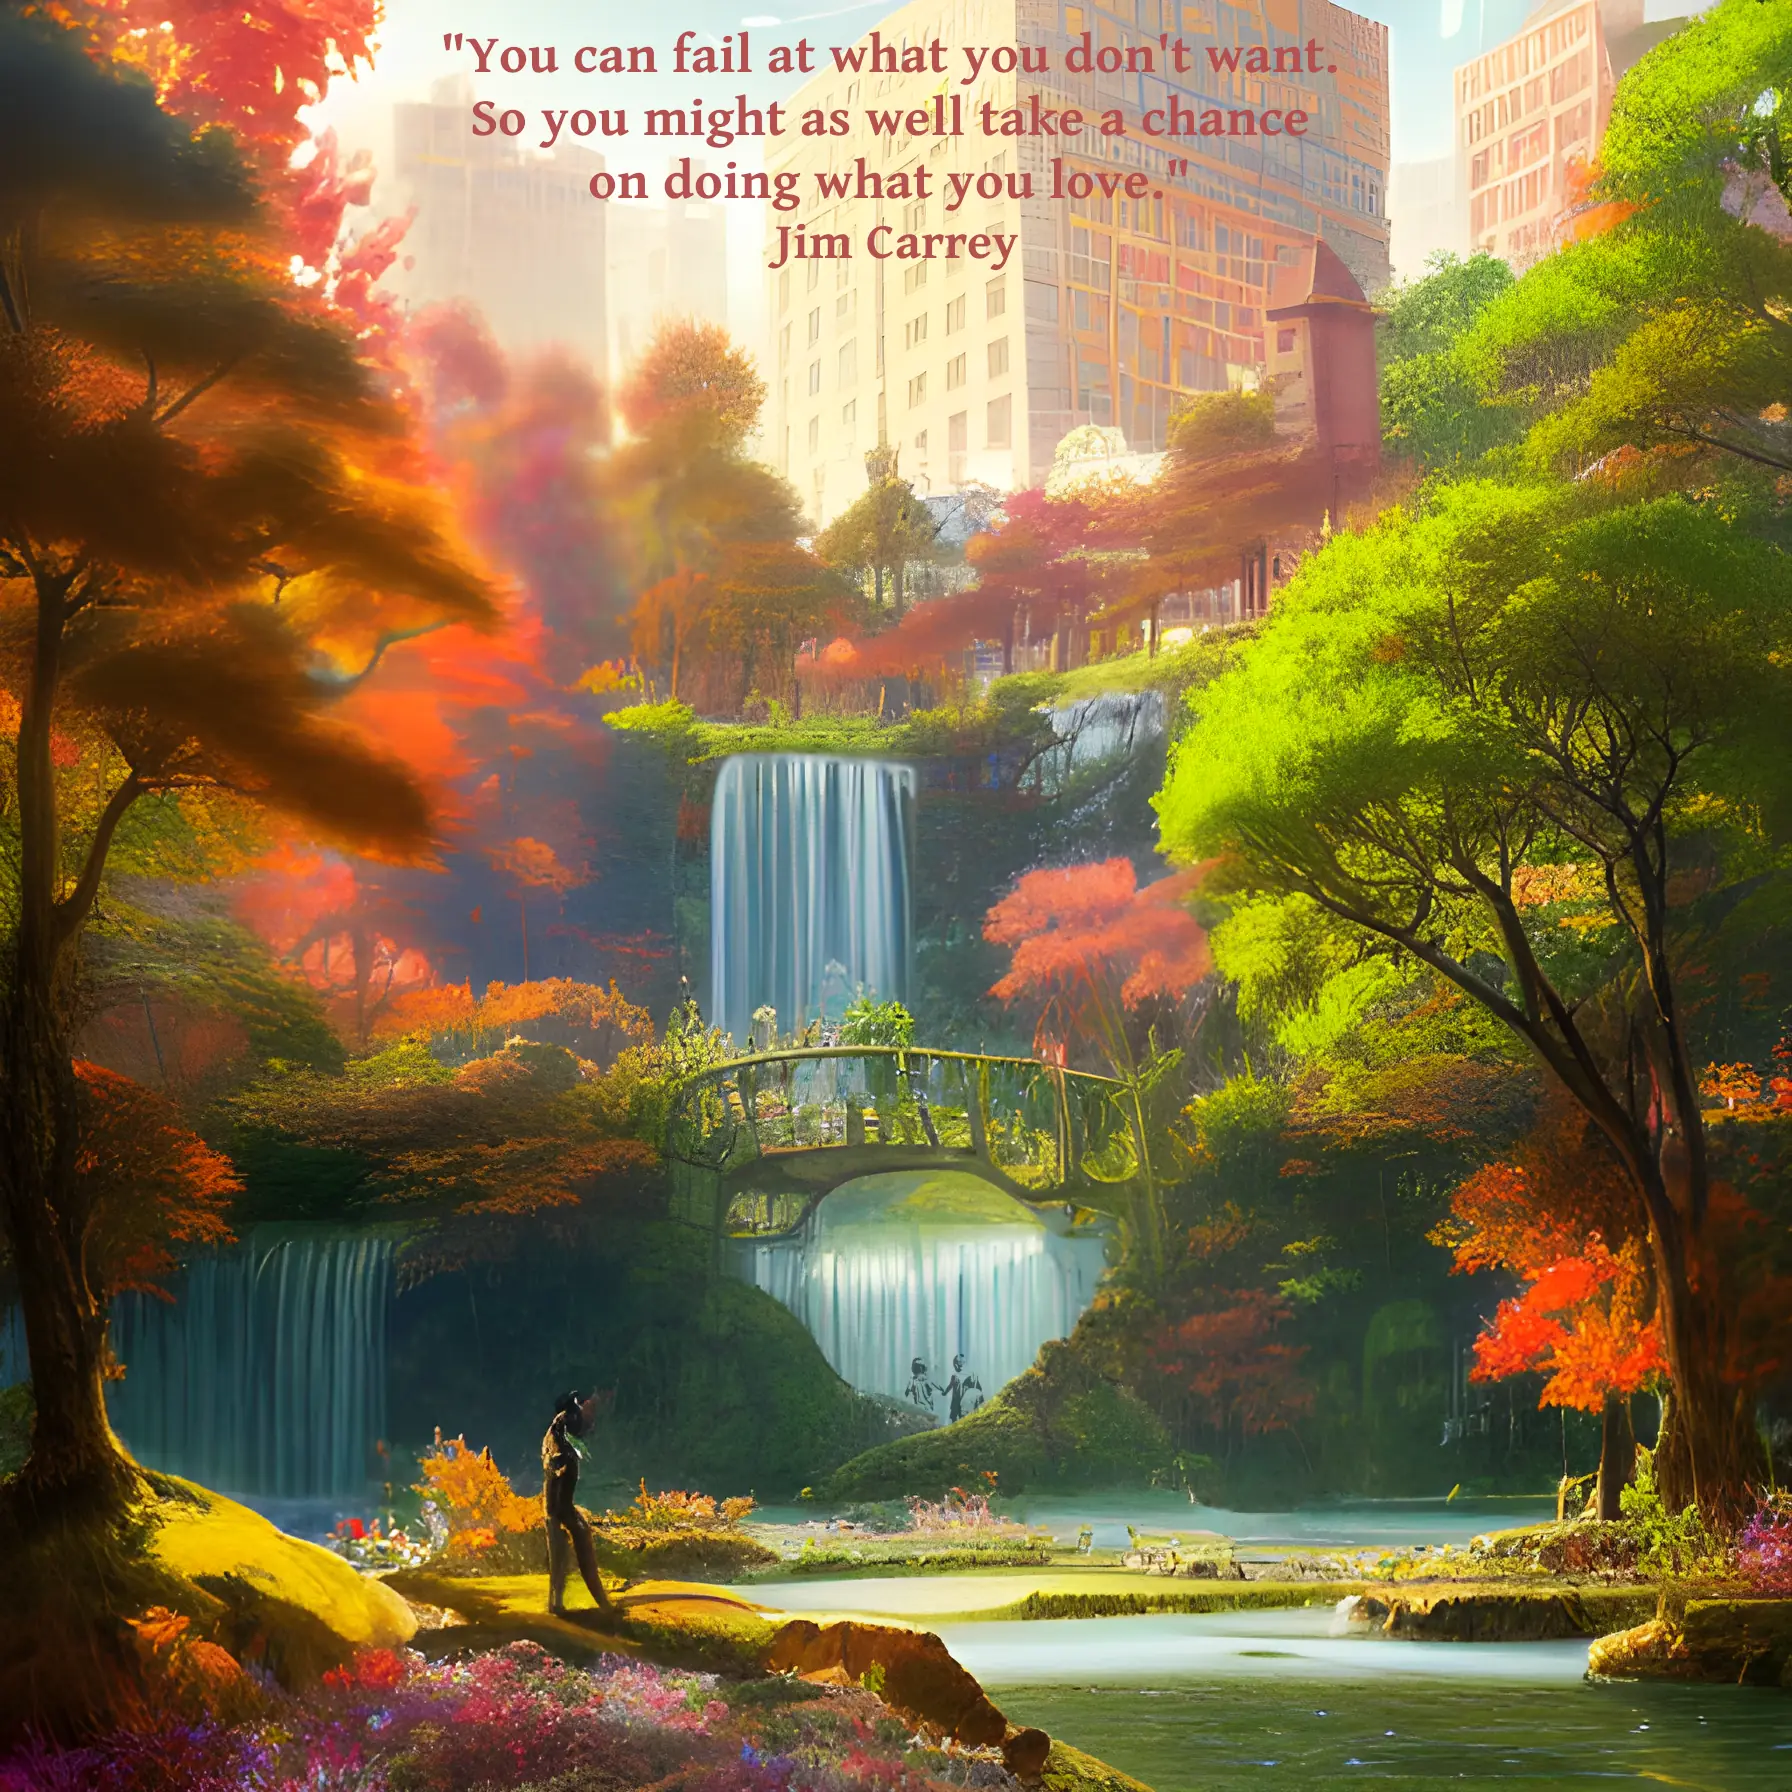 An artistic rendering of a waterfall in a park with a big city in the background. The quote reads: "You can fail at what you don't want. So you might as well take a chance on doing what you love." Jim Carrey